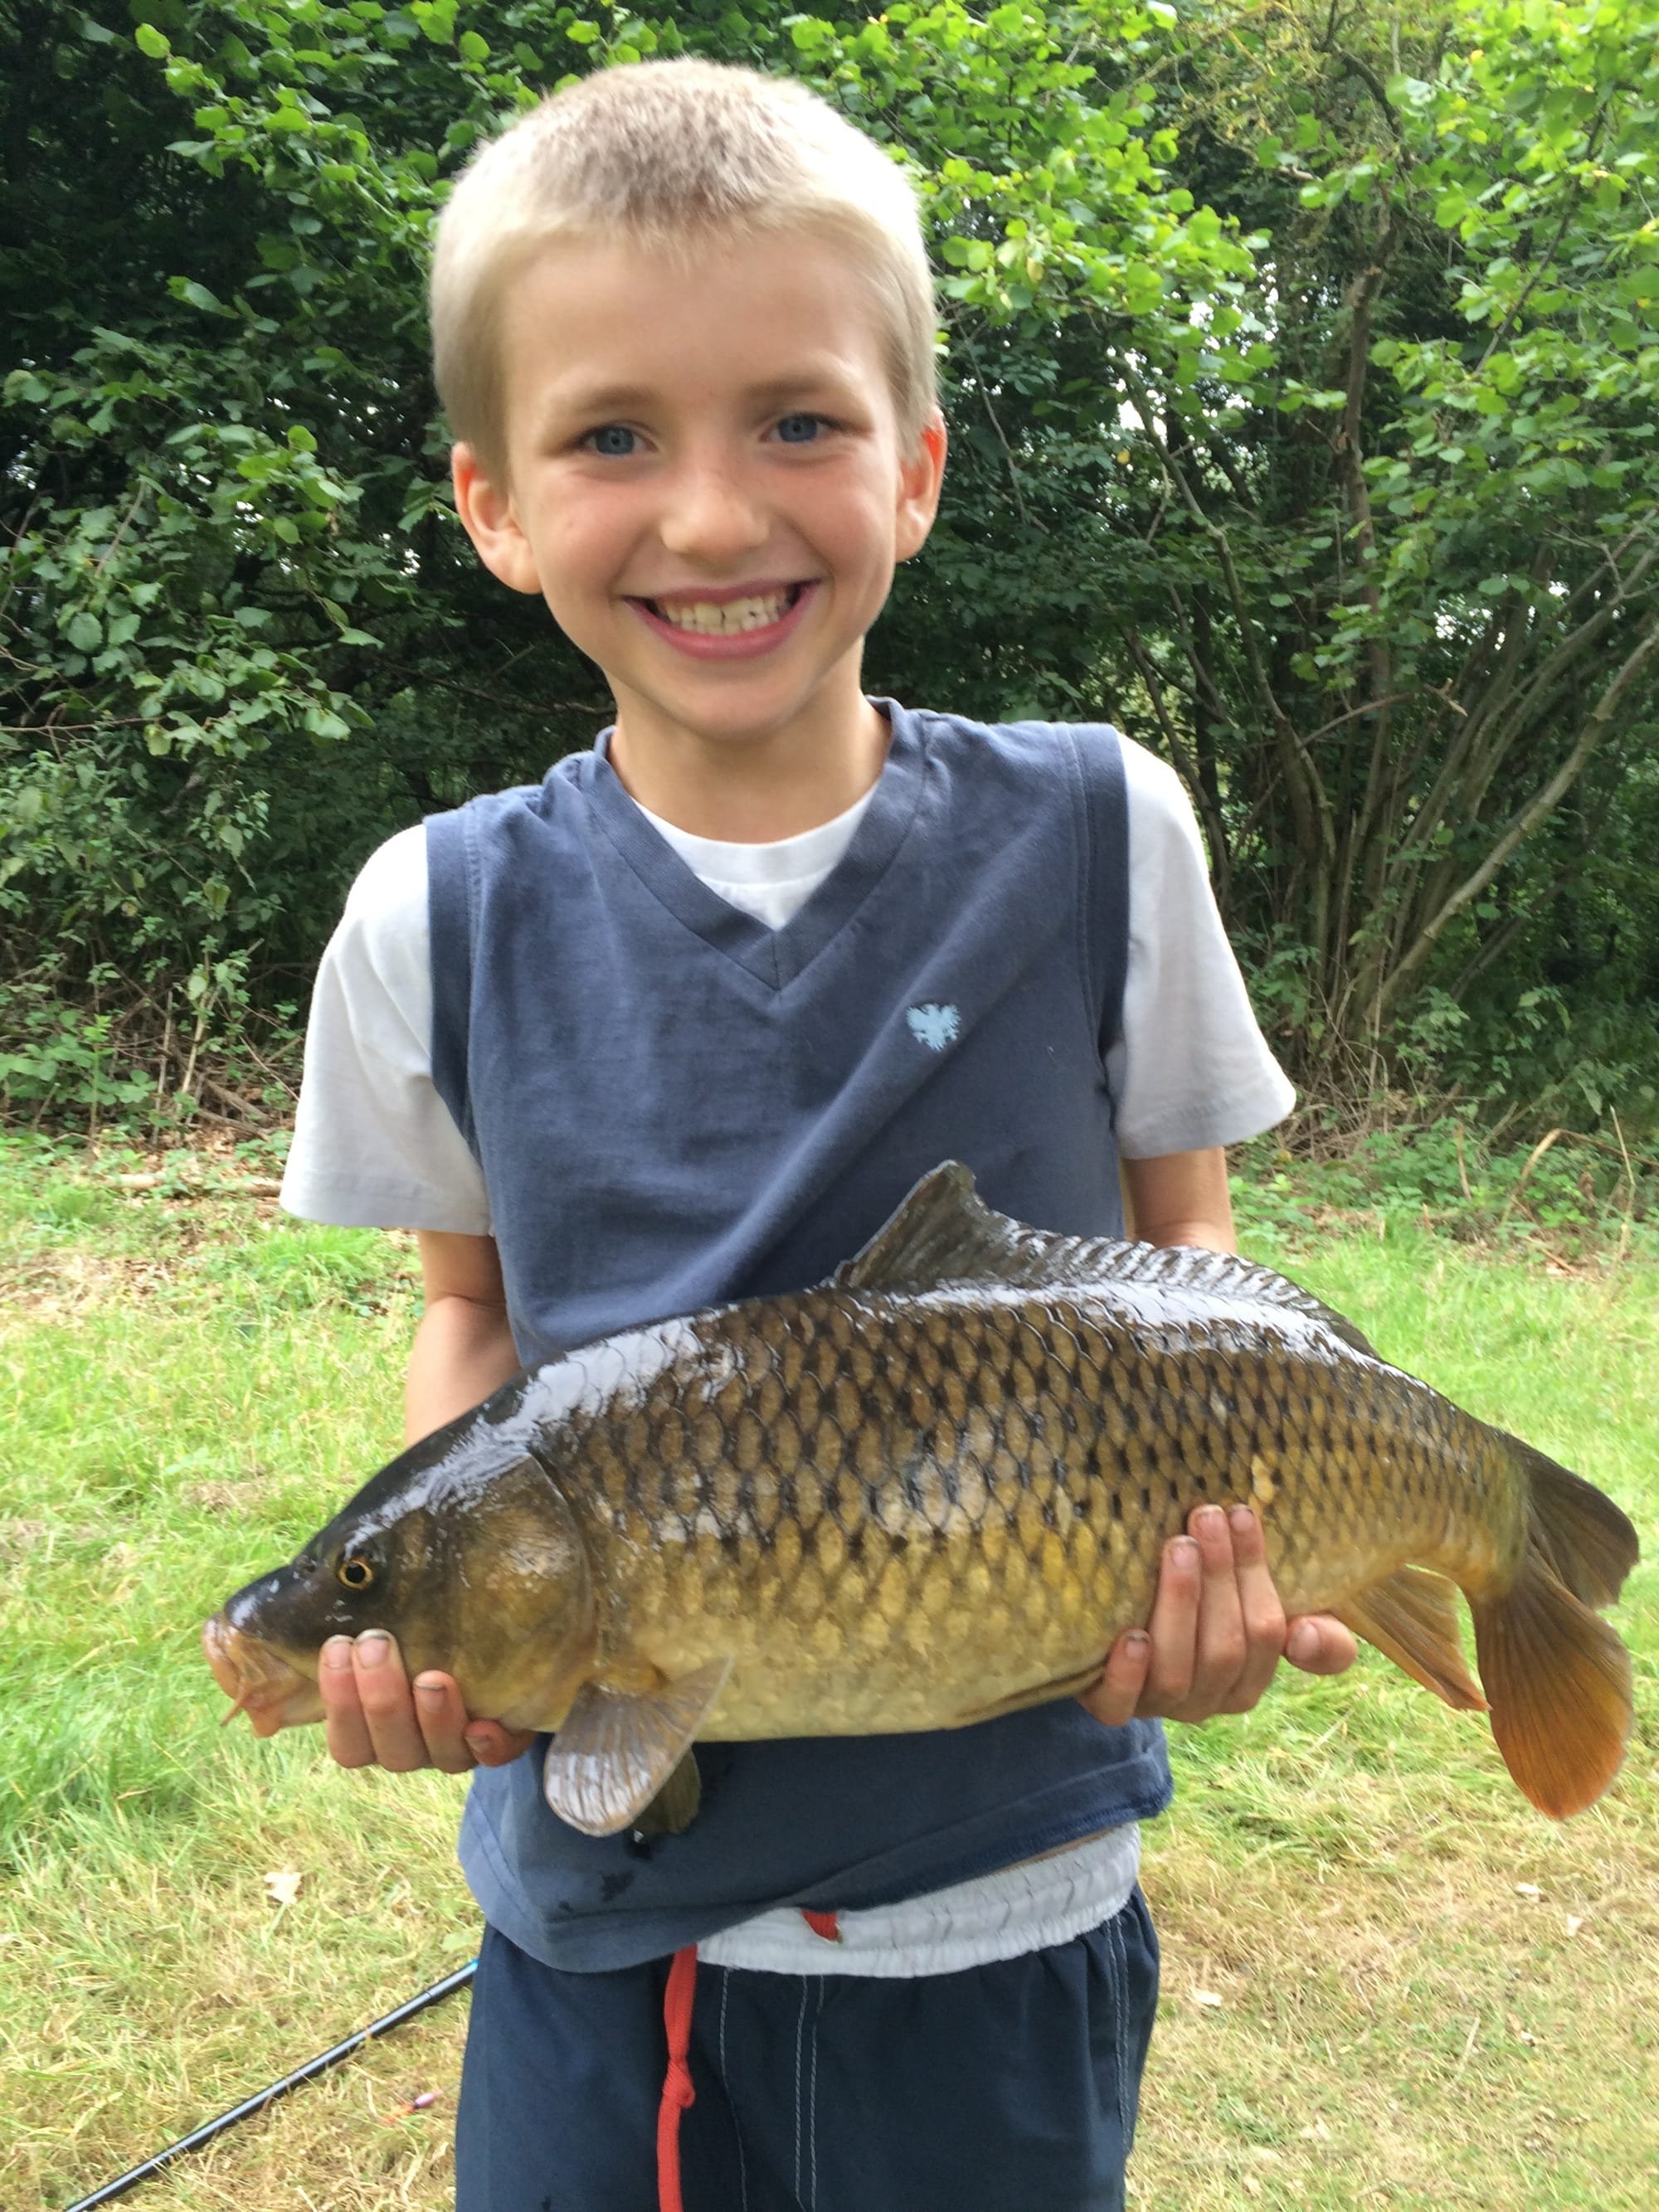 Another Junior pleased with his Carp